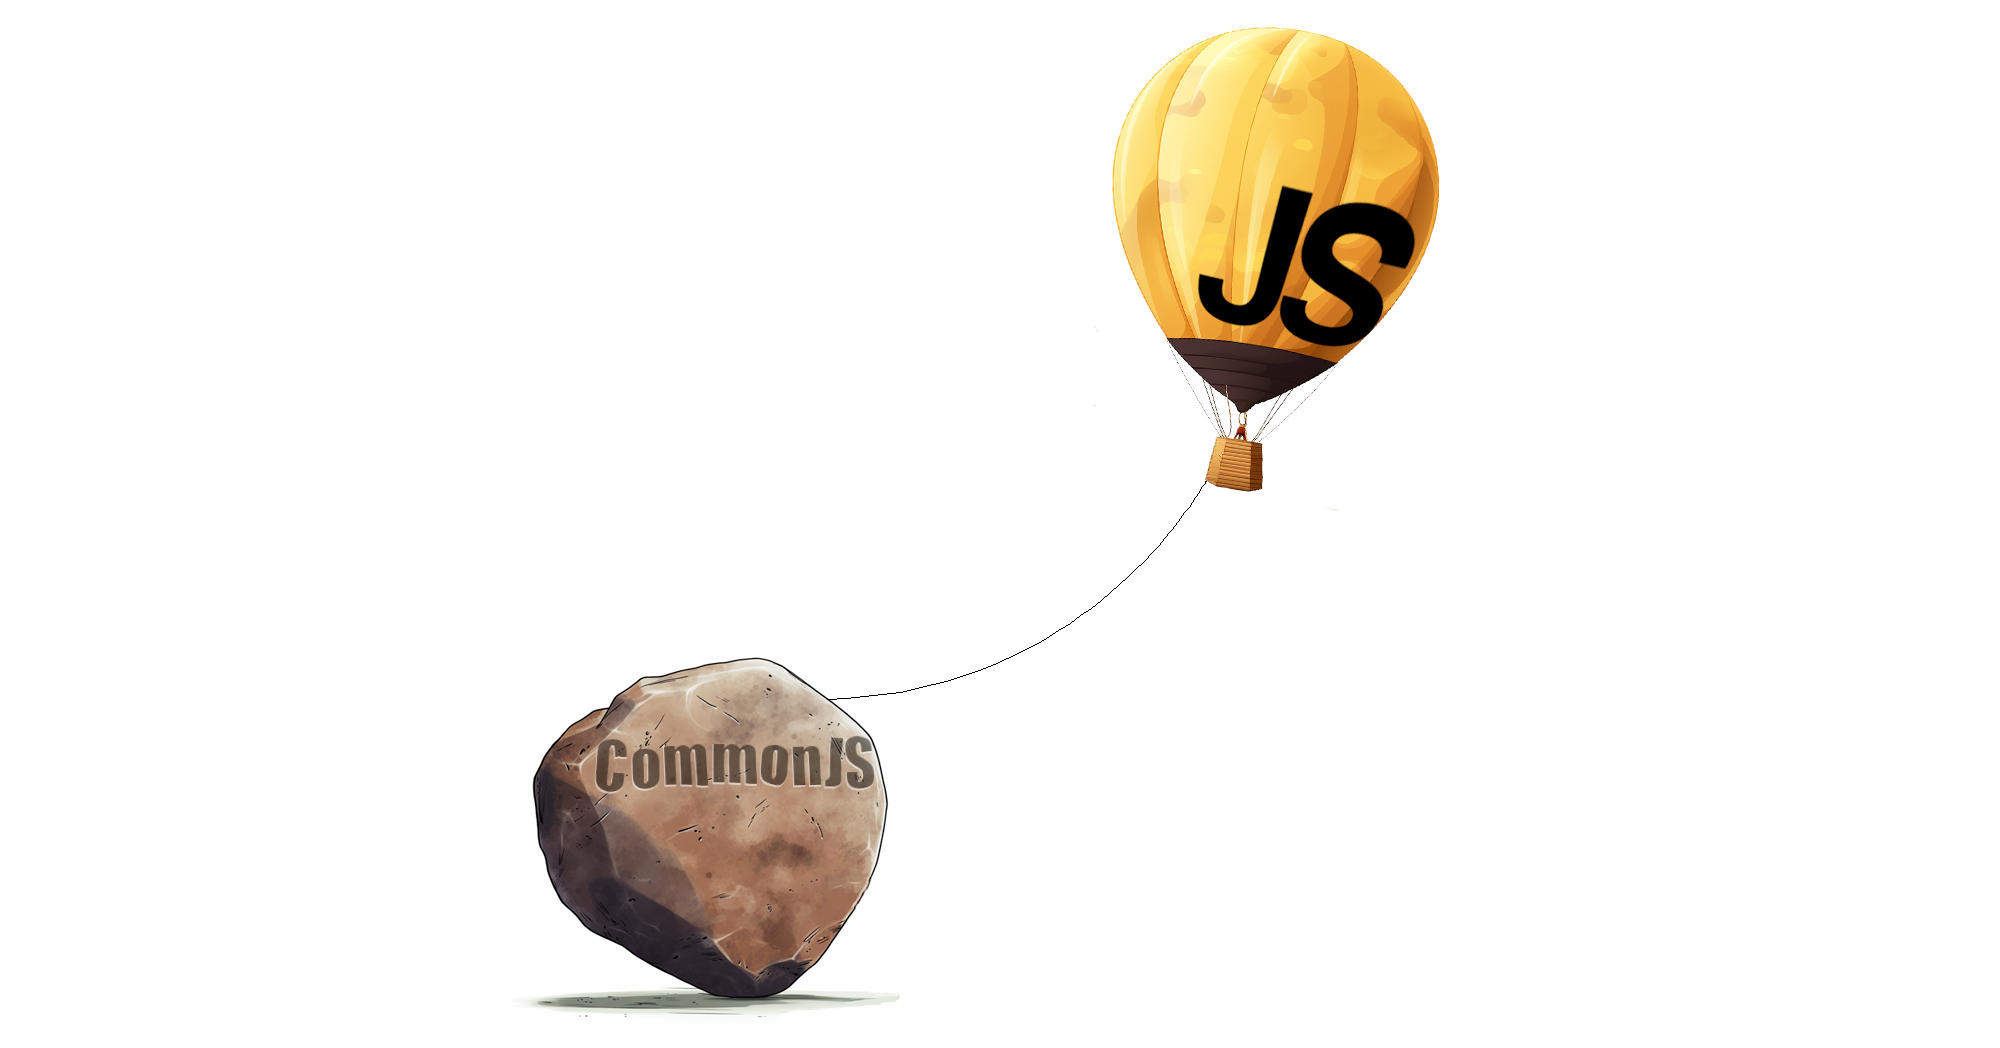 Progress of JavaScript being obstructed by CommonJS.